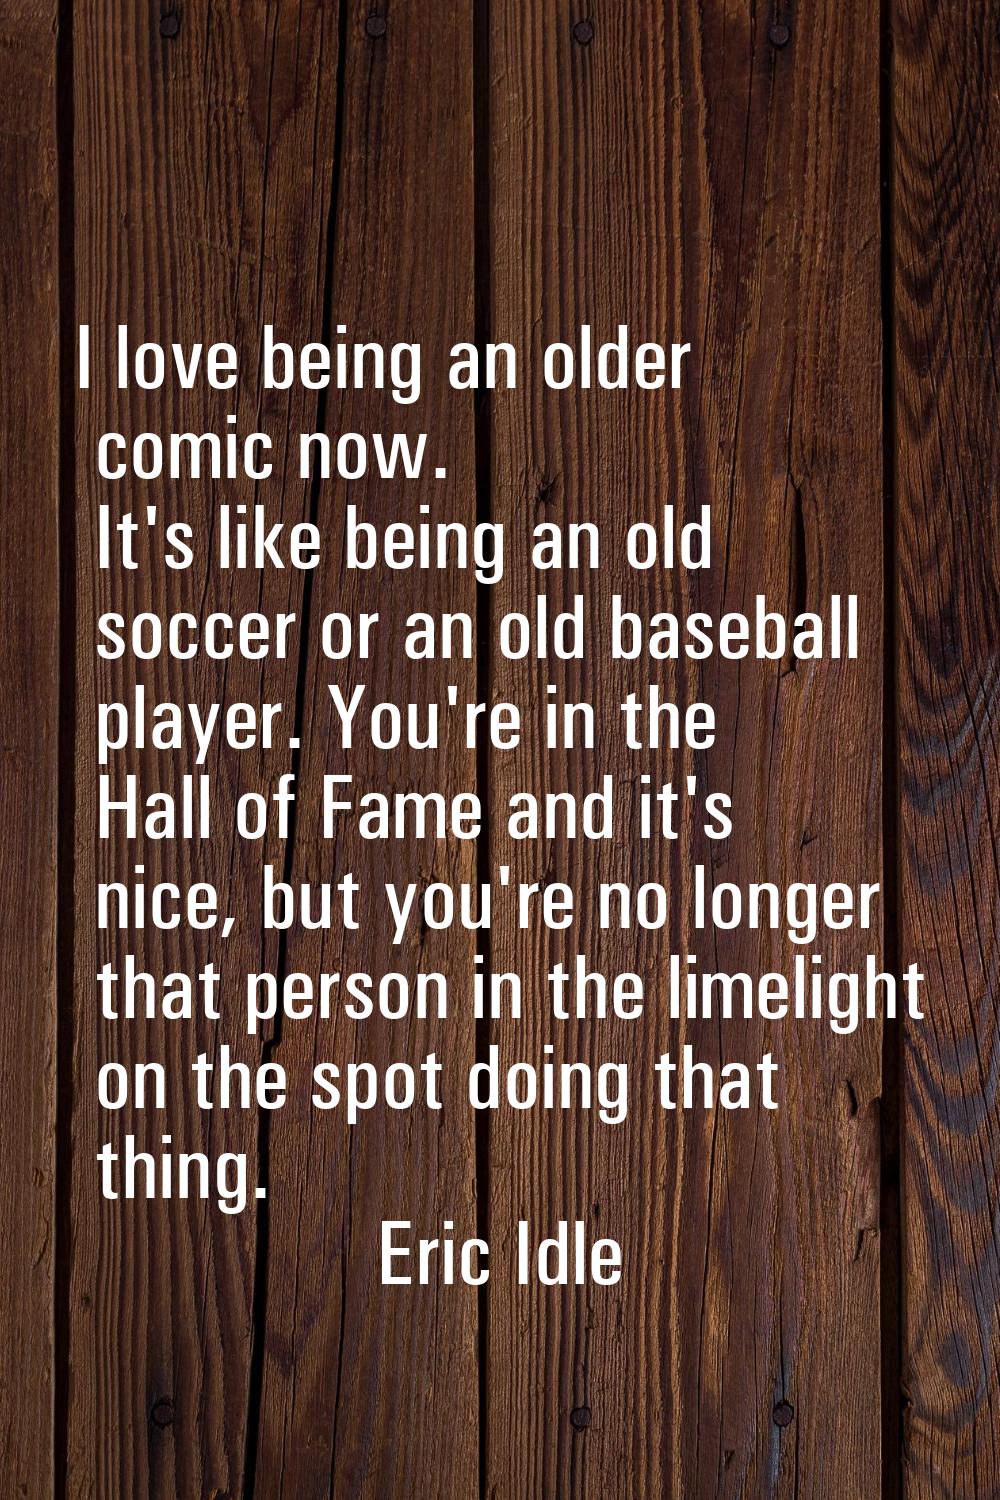 I love being an older comic now. It's like being an old soccer or an old baseball player. You're in